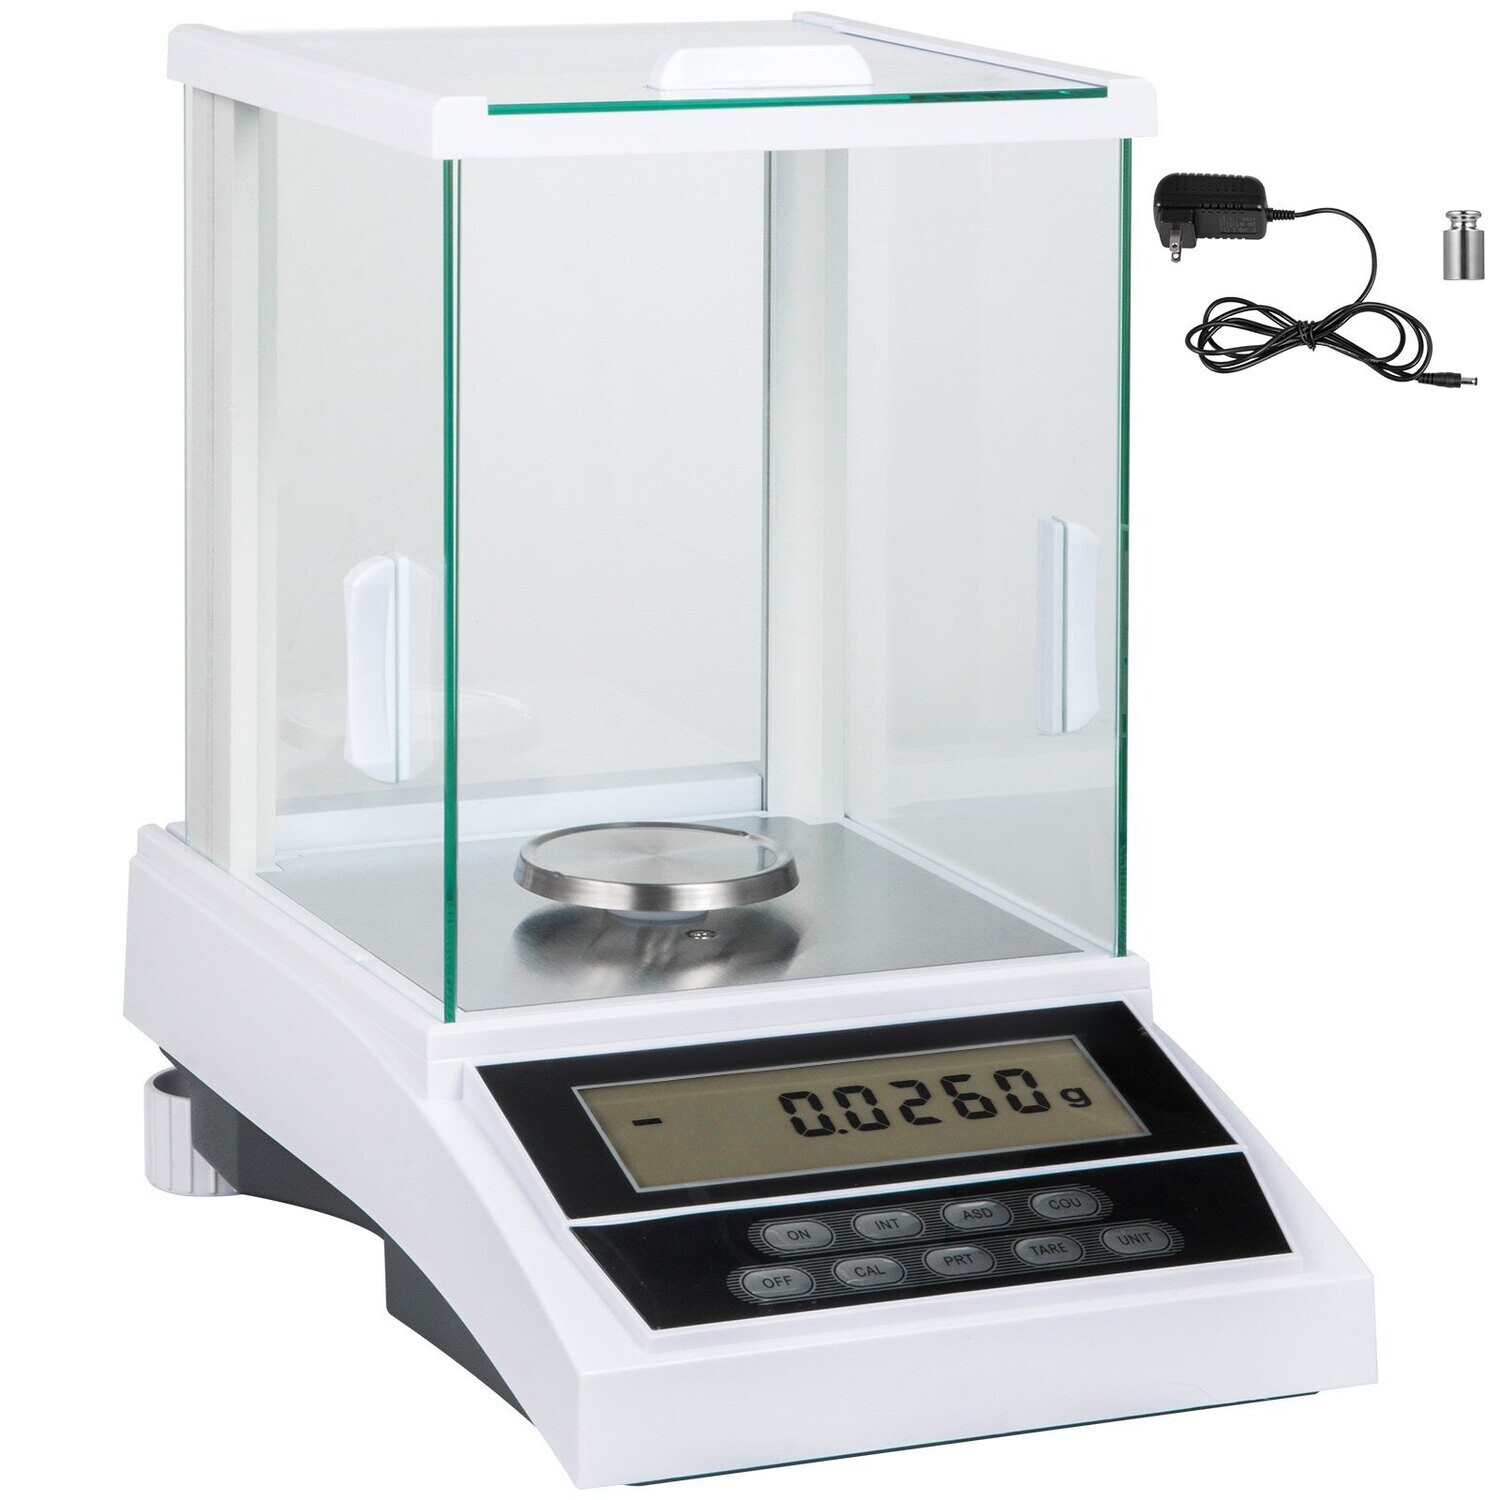 200g High Precision Electronic Analytical Scale Balance for Laboratory Pharmacy